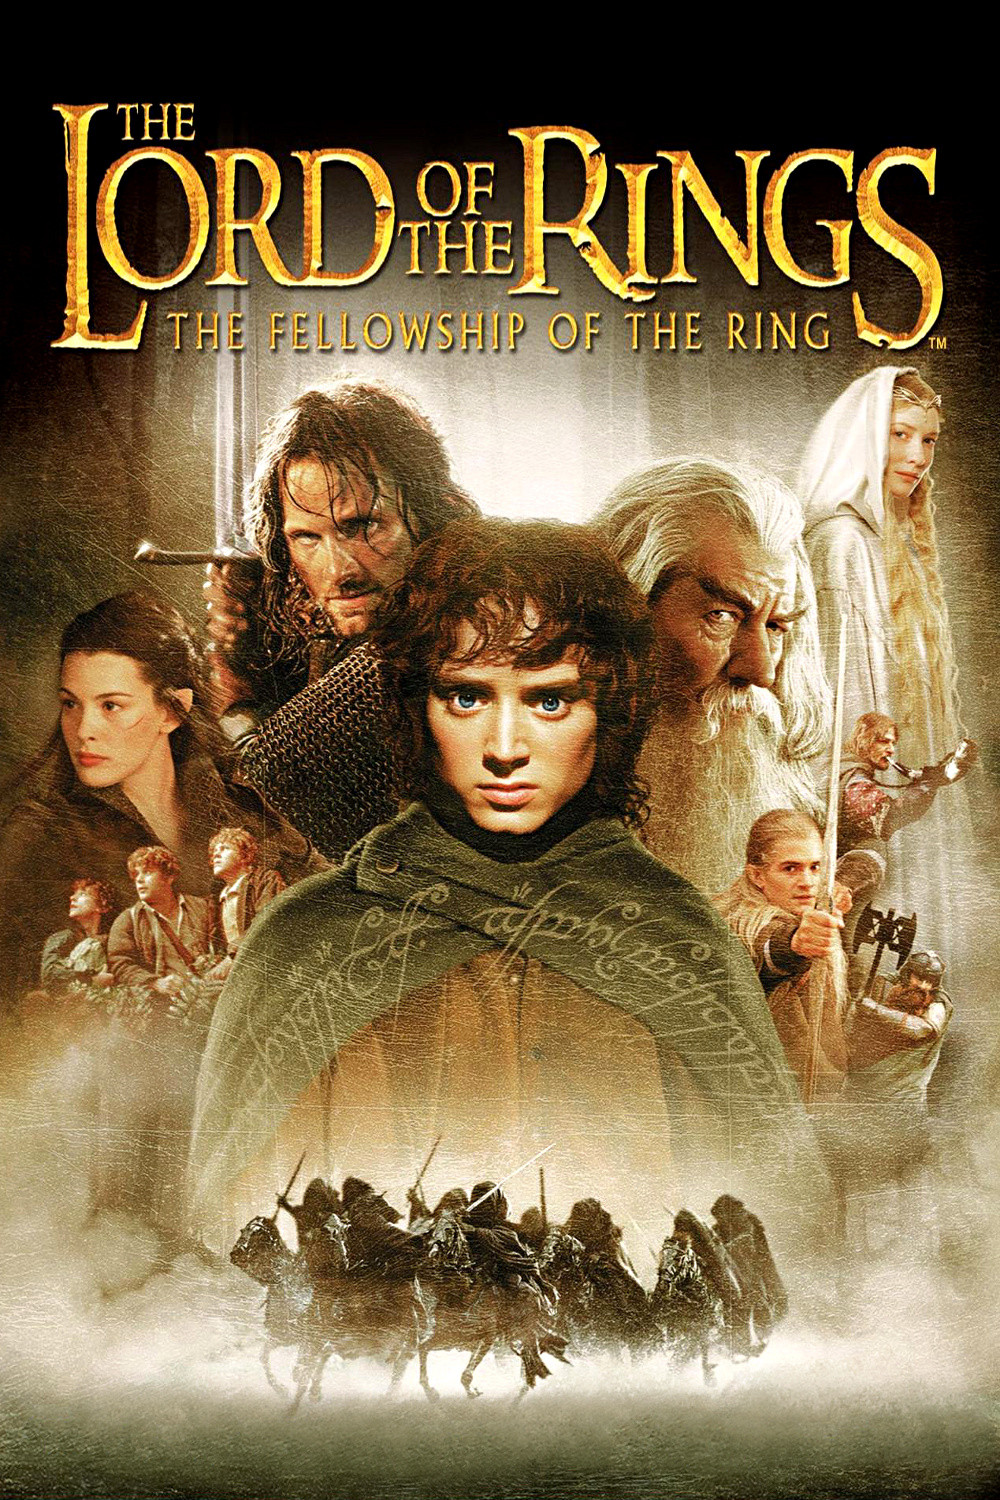 THE LORD OF THE RINGS THE FELLOWSHIP OF THE RING